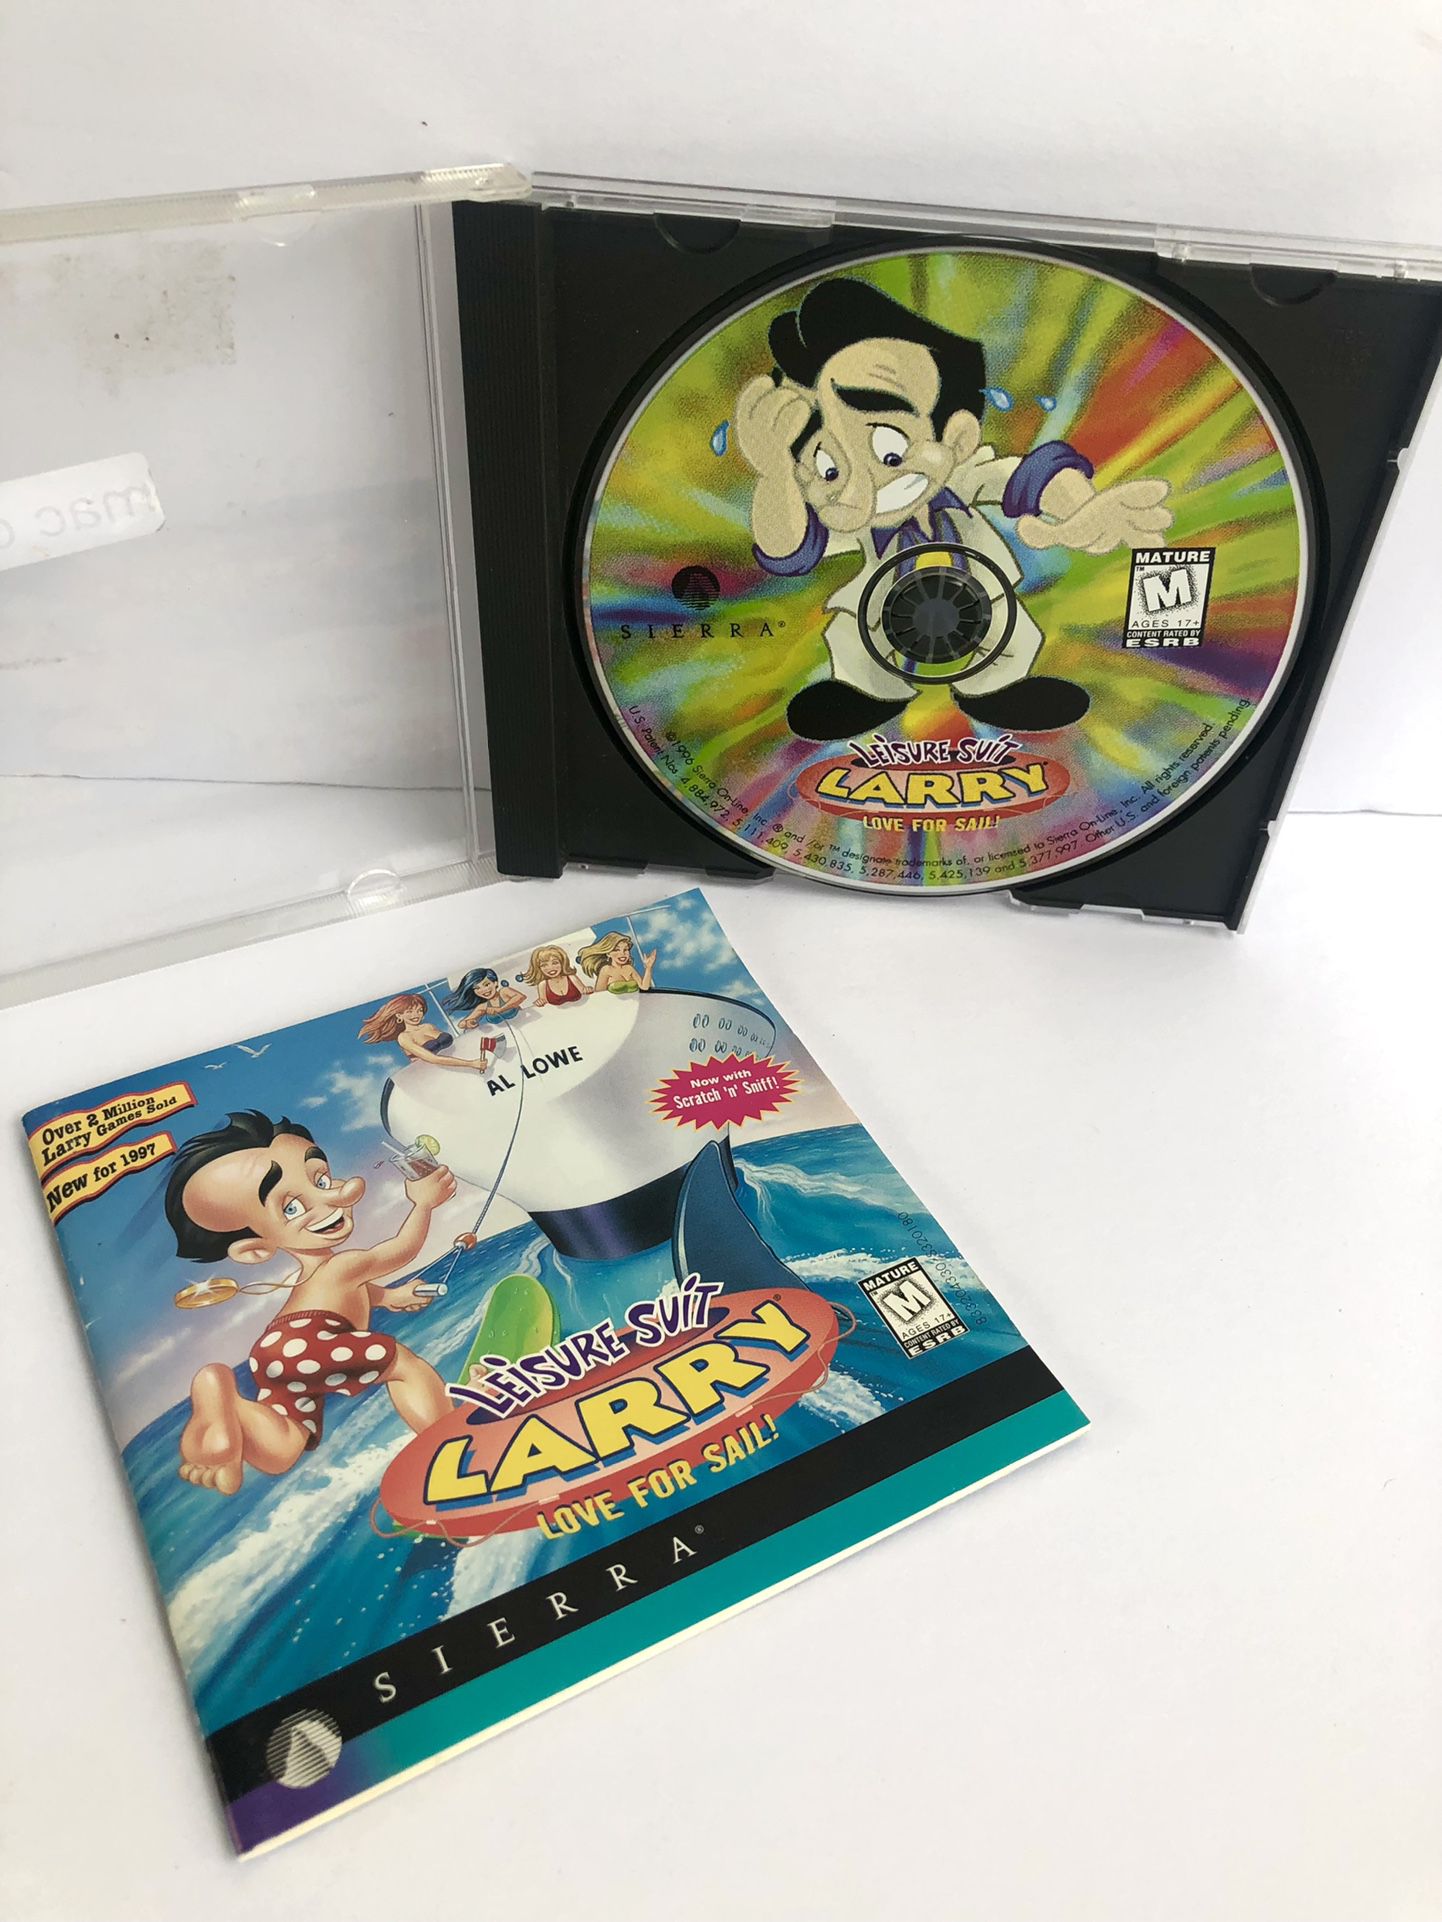 Vintage Leisure Suit Larry Love For Sail Game For Mac